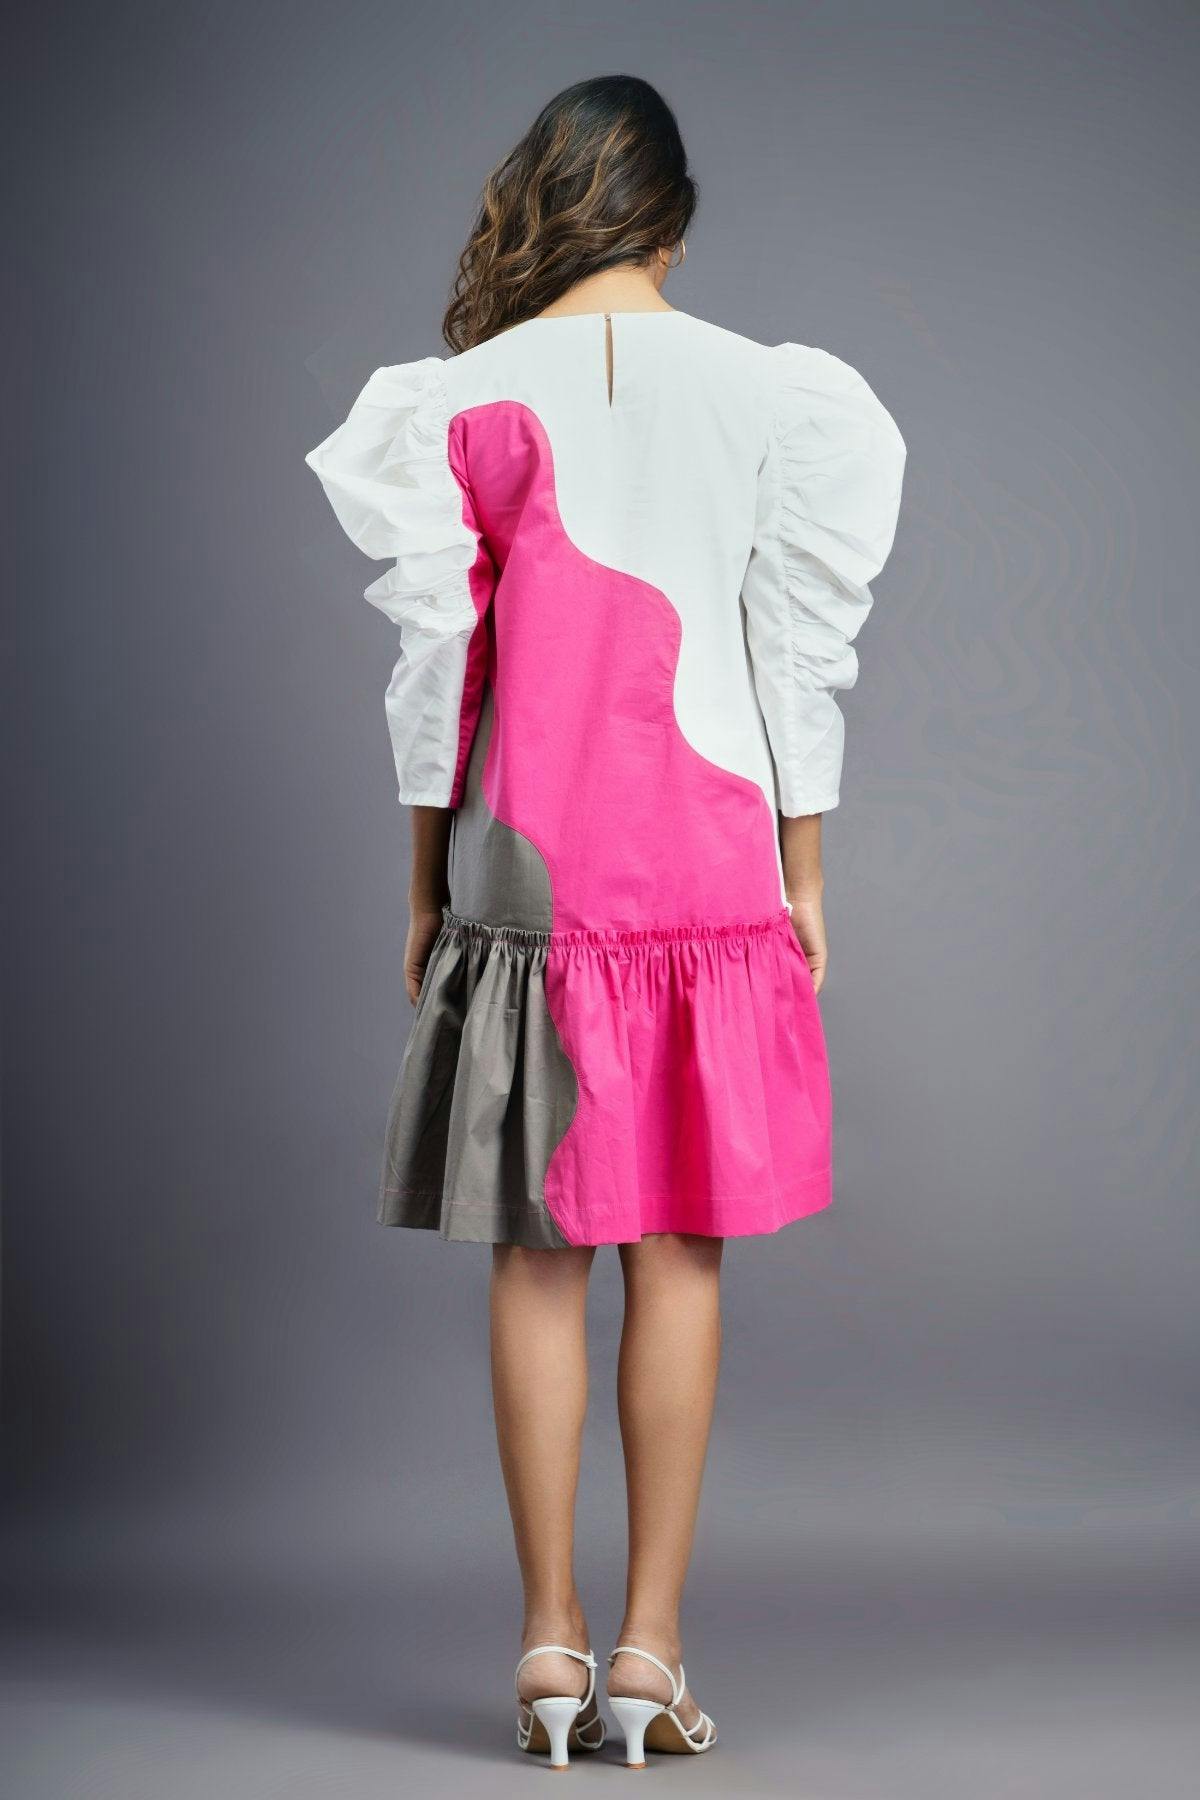 Thumbnail preview #2 for BB-1104-PG - White Pink Short Dress With Frills